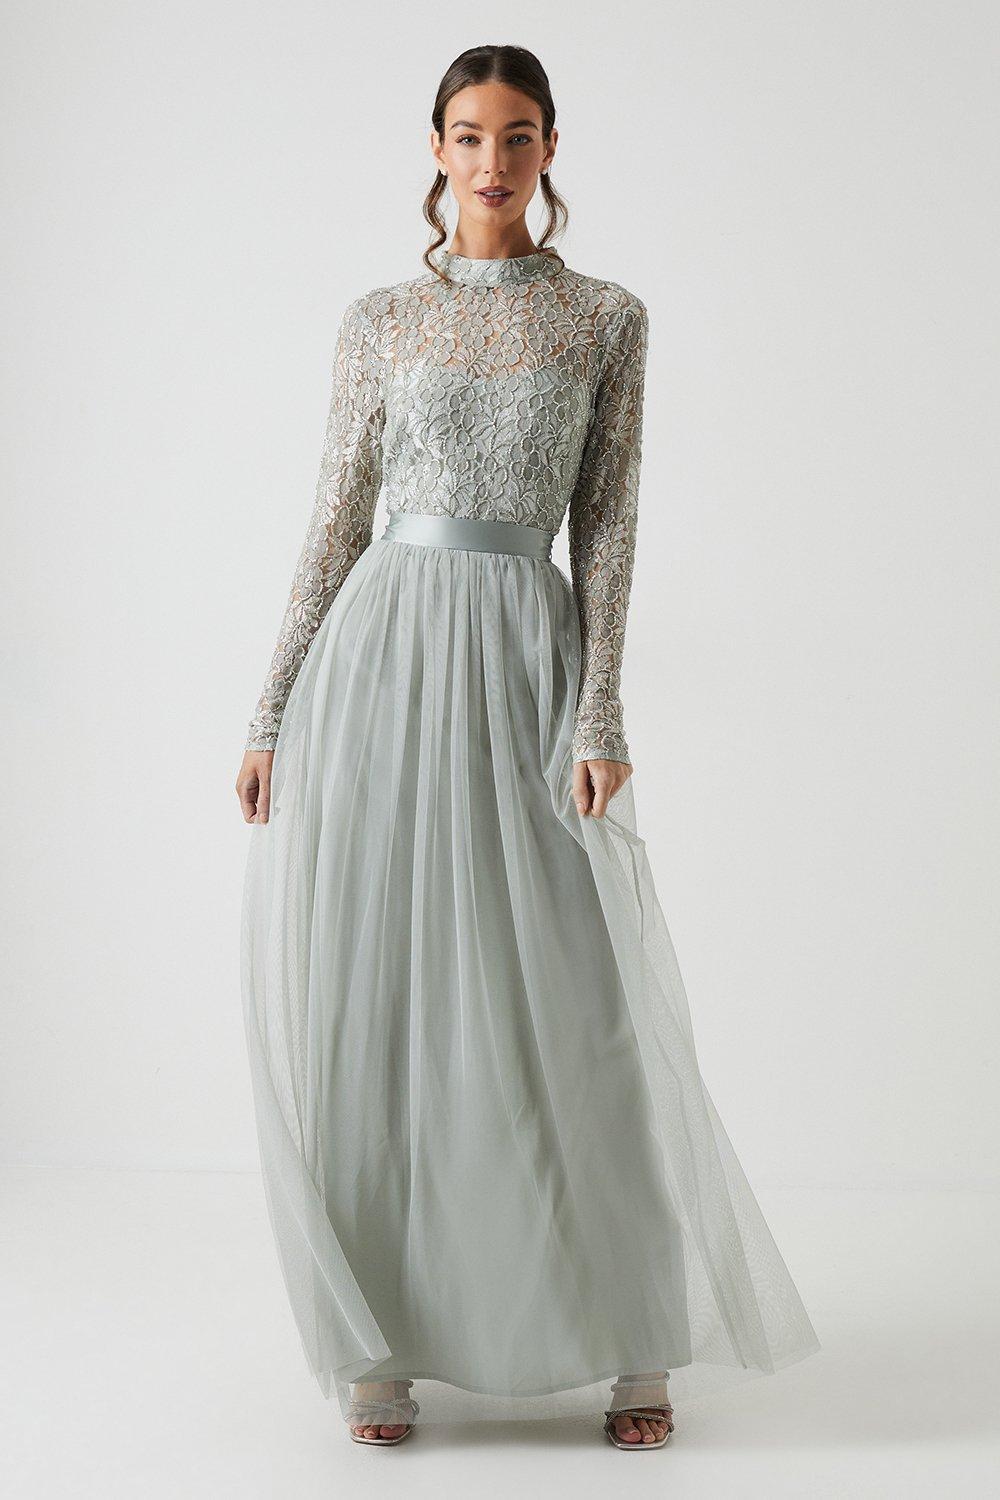 Embellished Lace Two In One Bridesmaids Dress - Sage